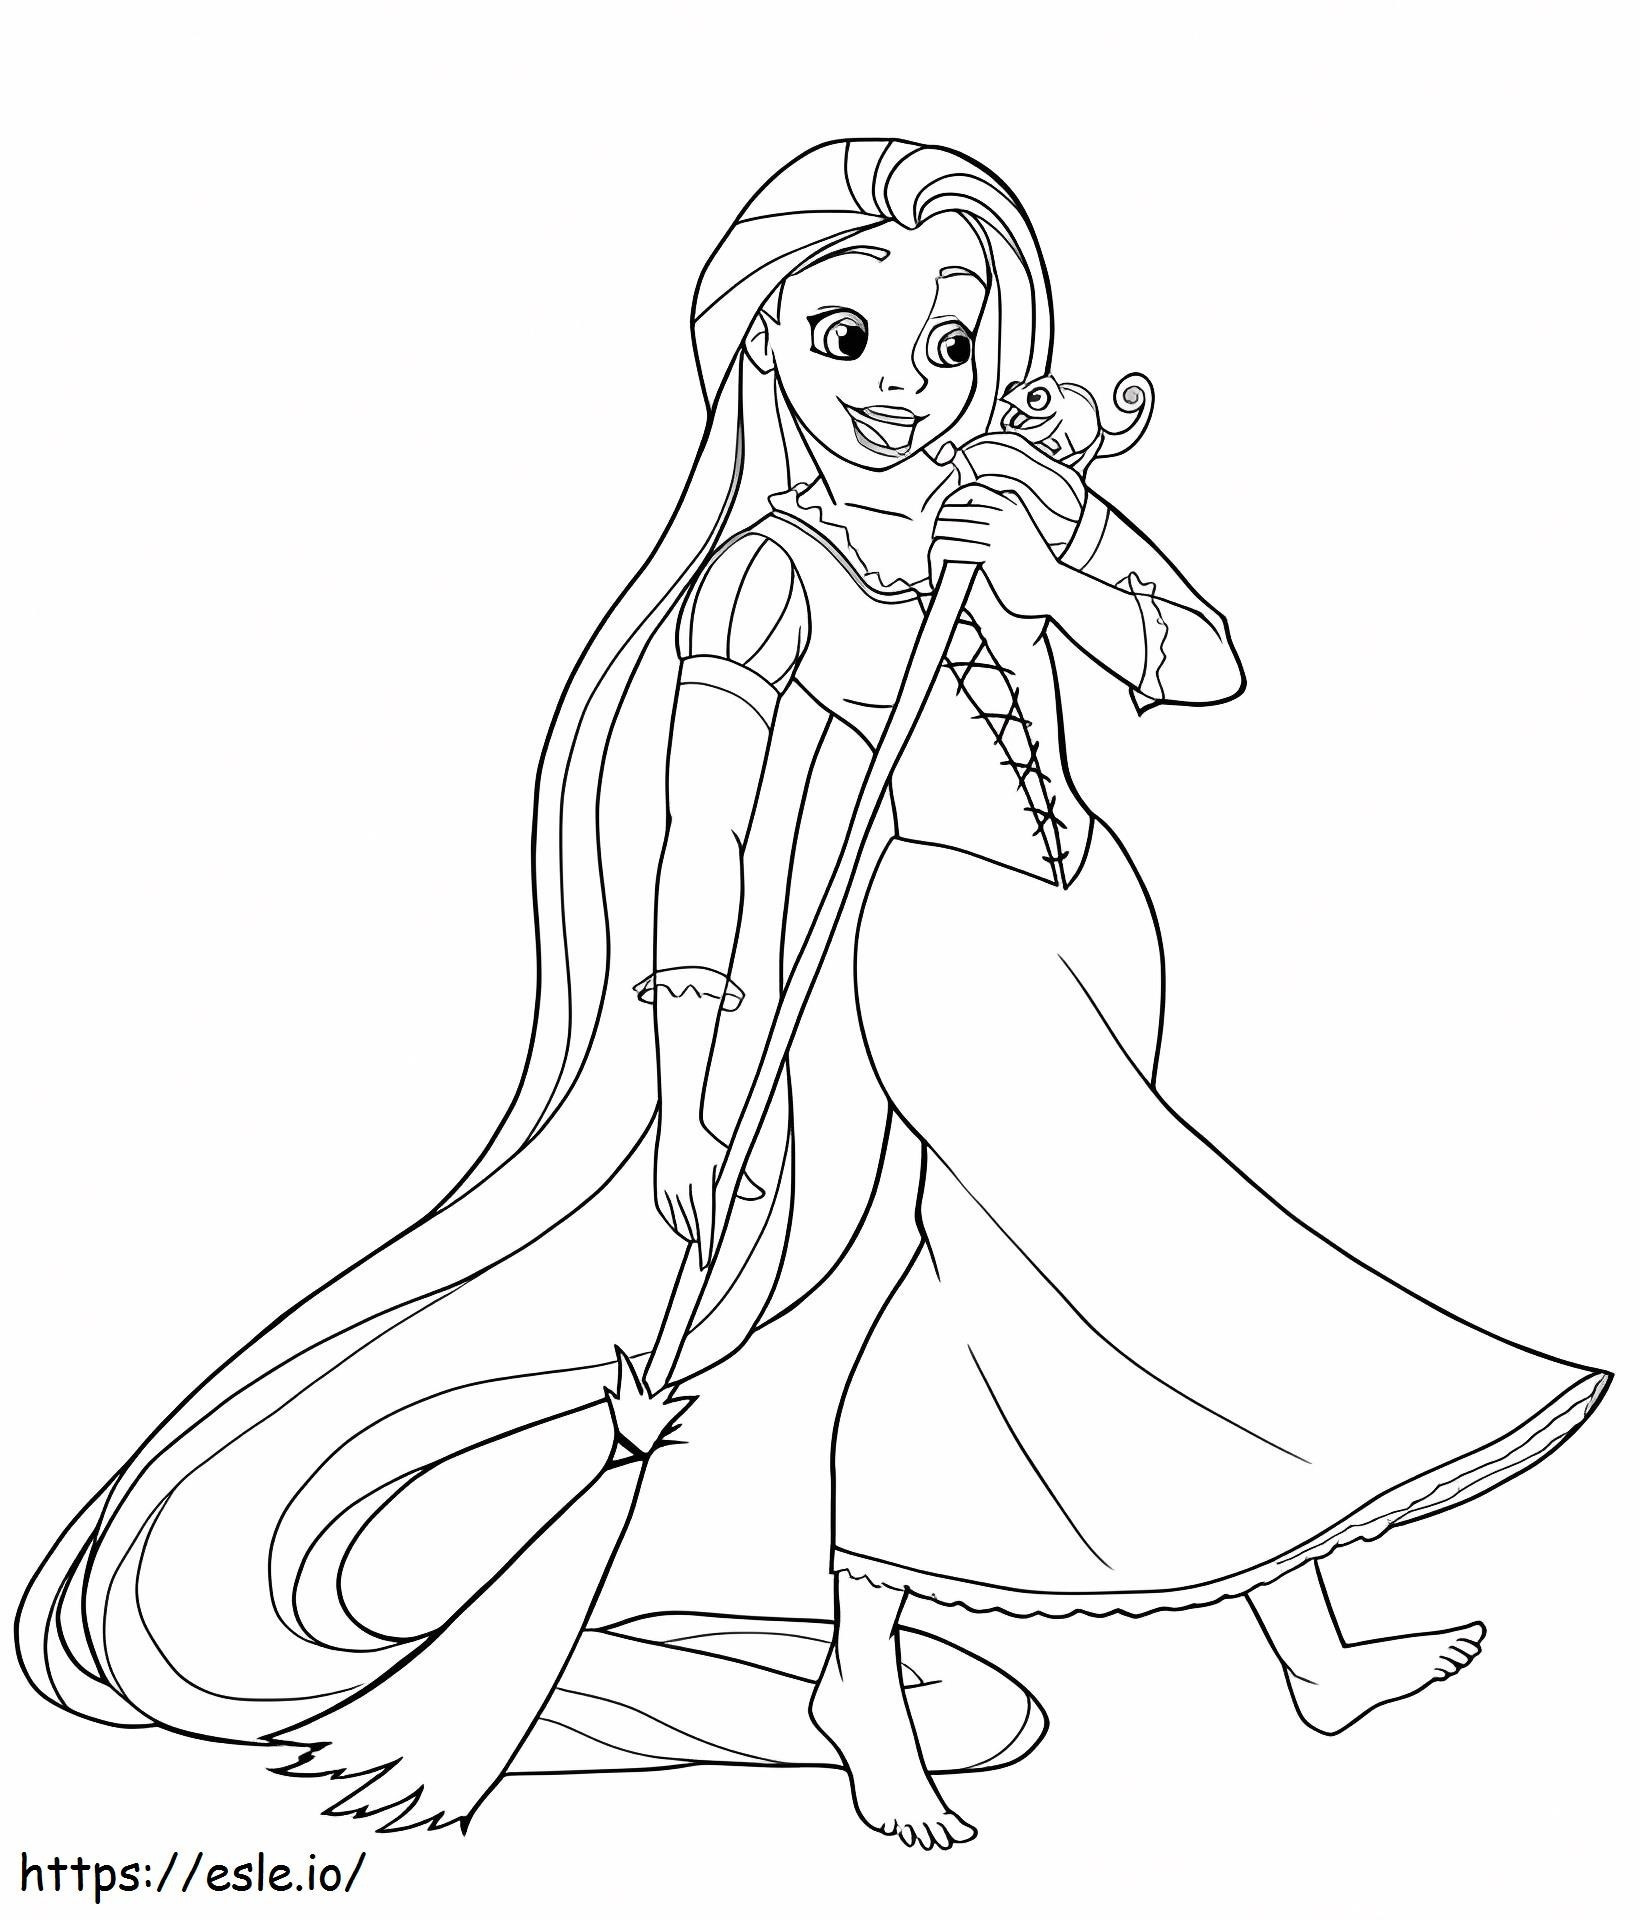 1530070590 10 coloring page